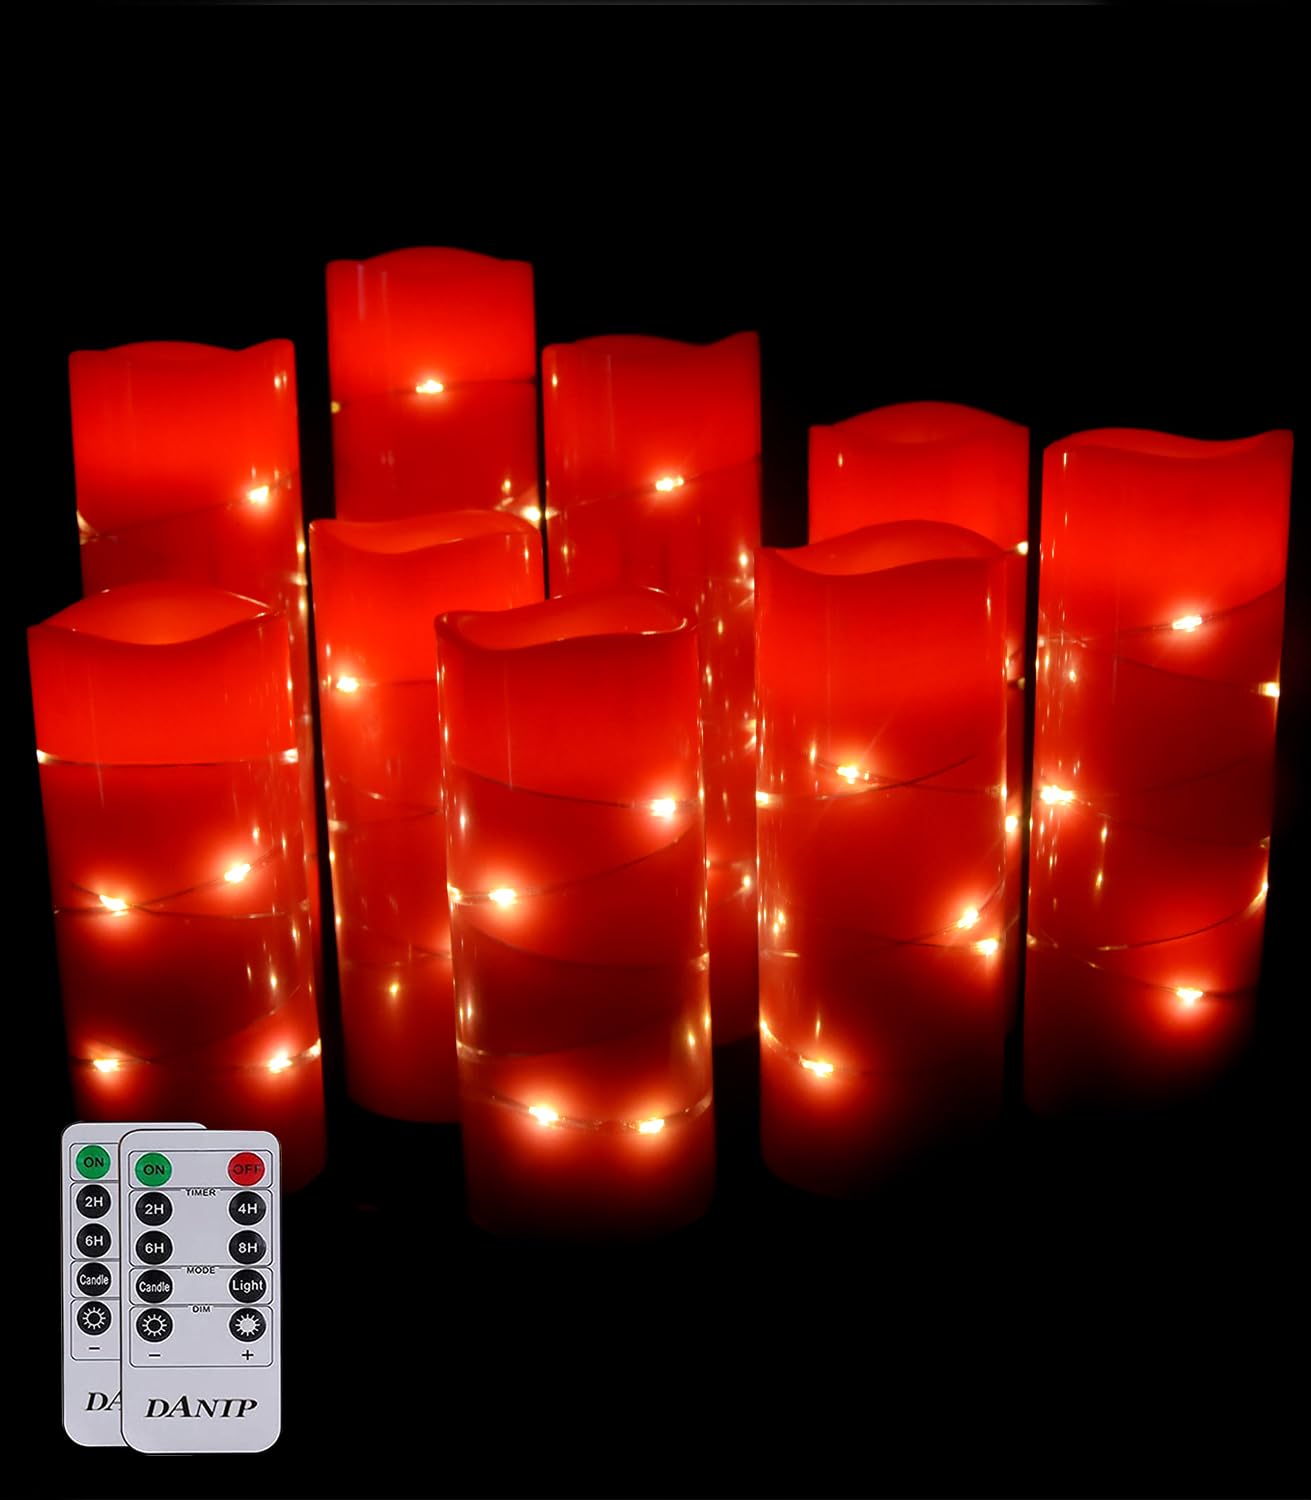 DANIP red flameless Candle, Built-in Star Cluster, 9 LED Candles, 11 Button Remote Control, 24-Hour Cycle Timer, Flashing Flame, Real Wax, Battery Powered. (Starry Sky Series)